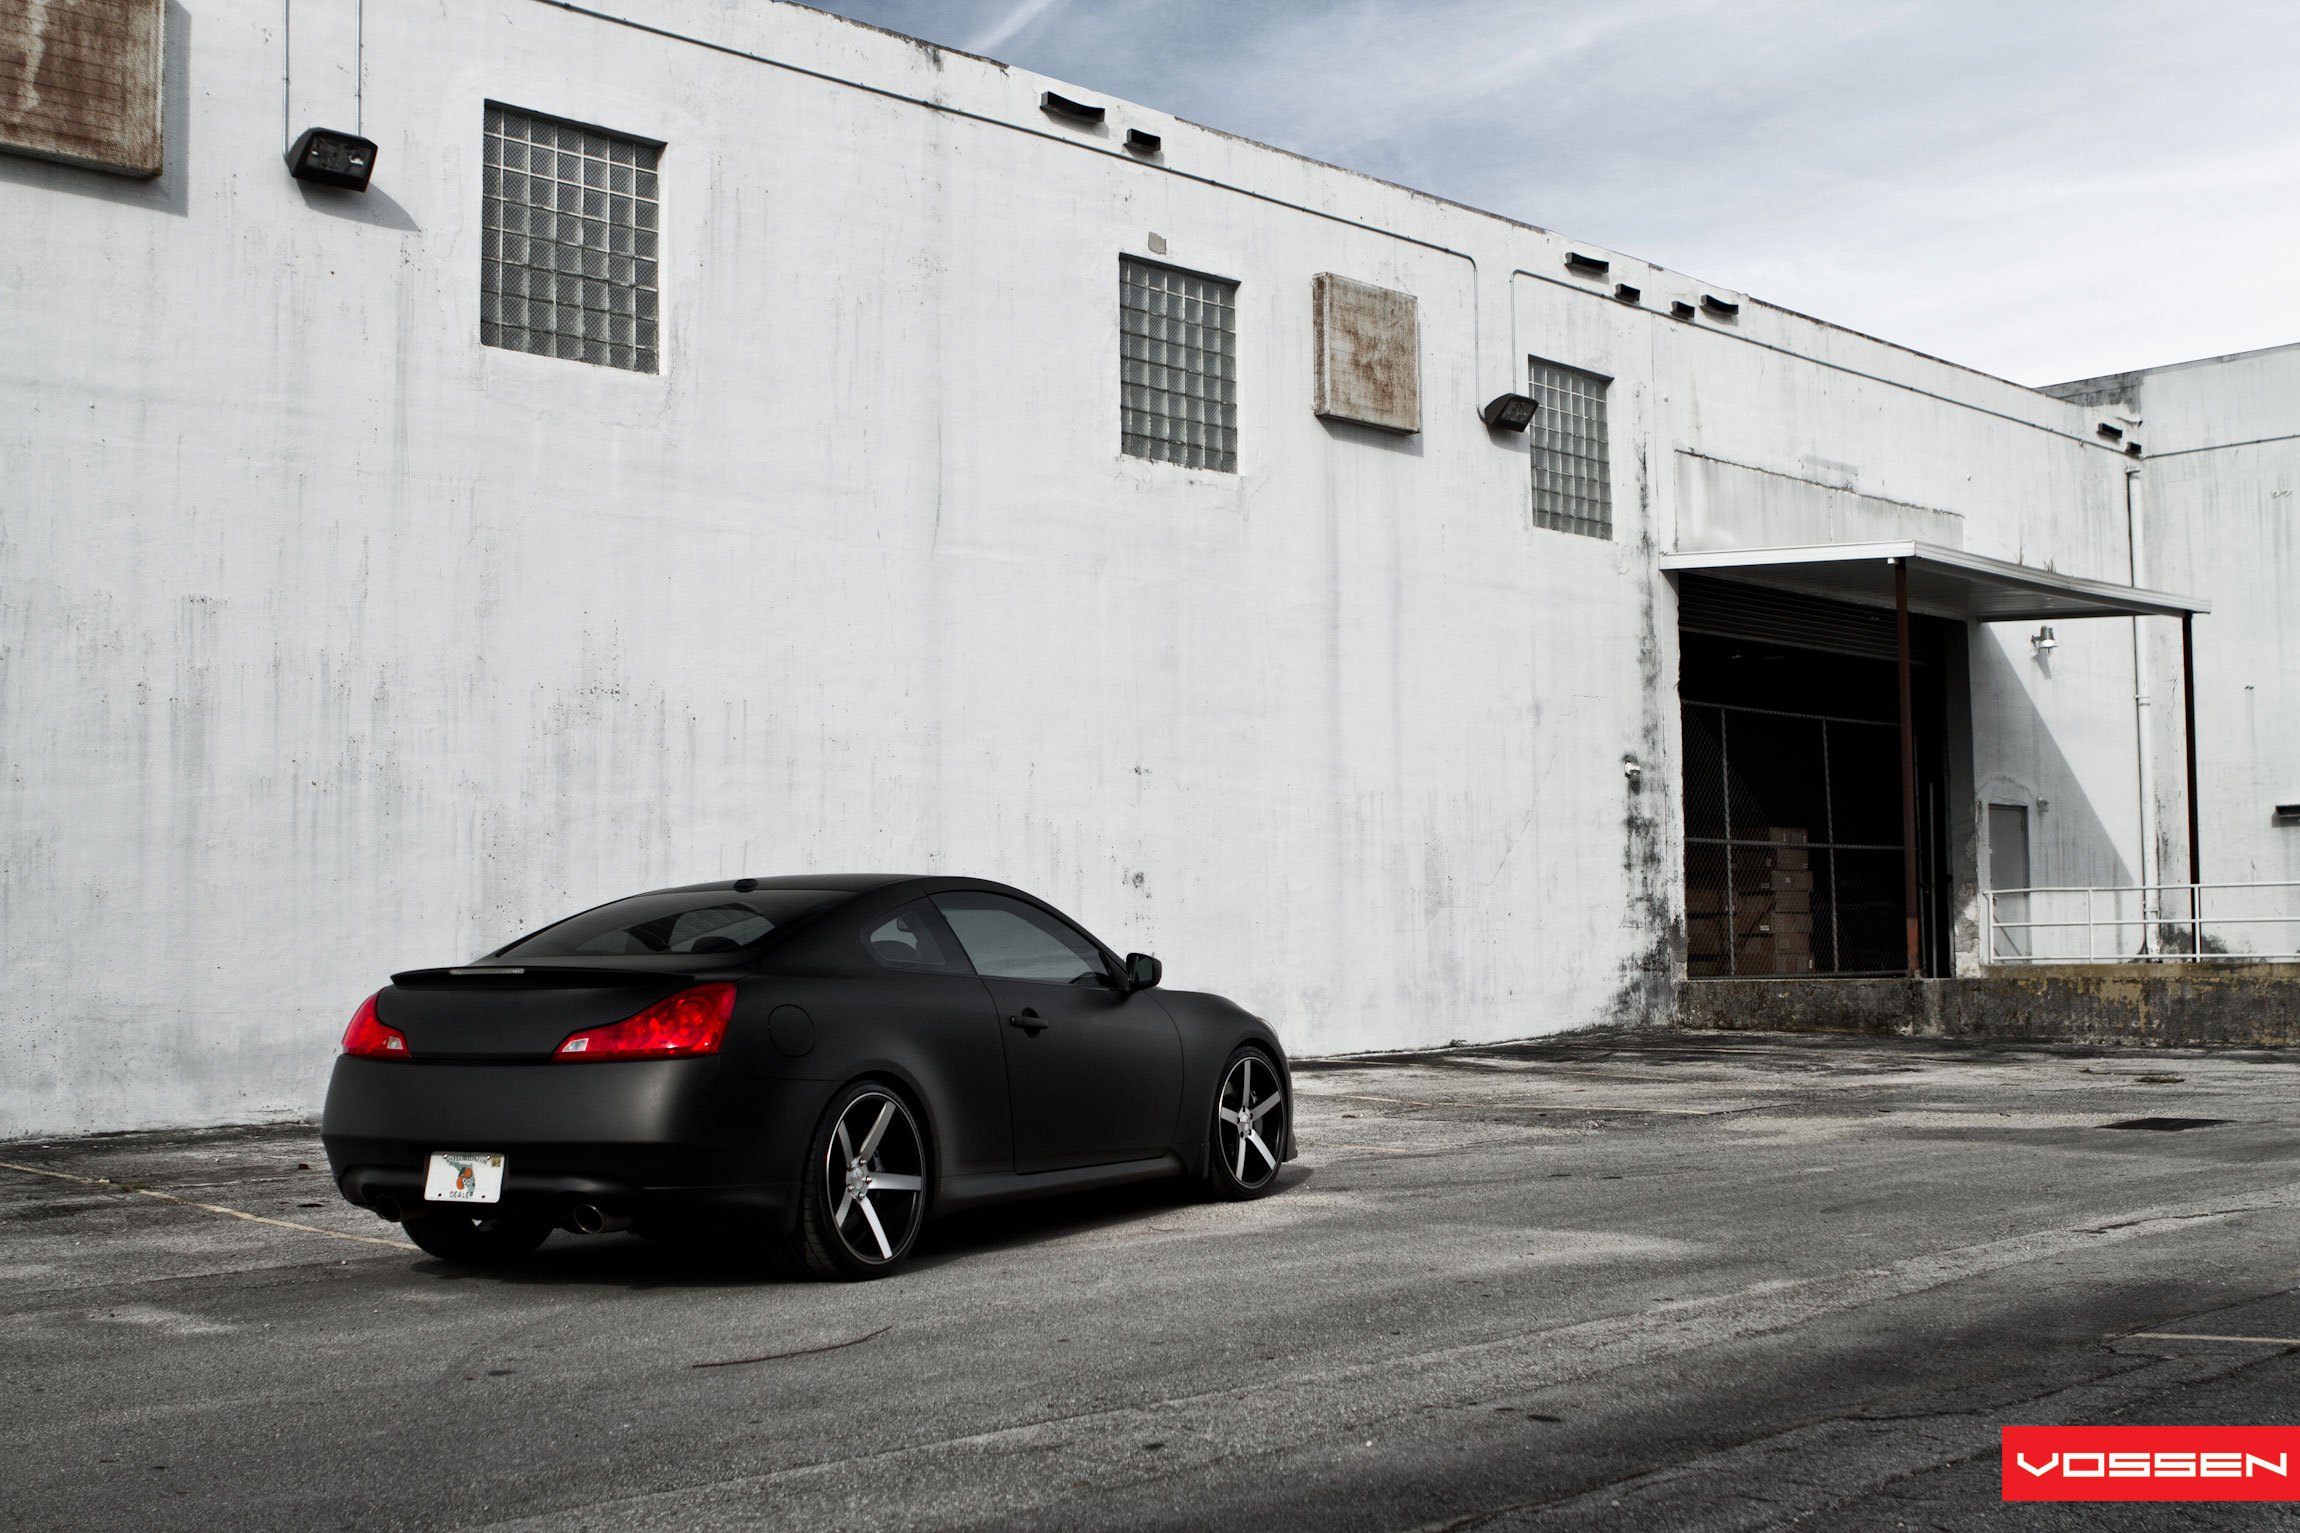 Black Matte Infiniti G37 with Factory Style Rear Spoiler - Photo by Vossen